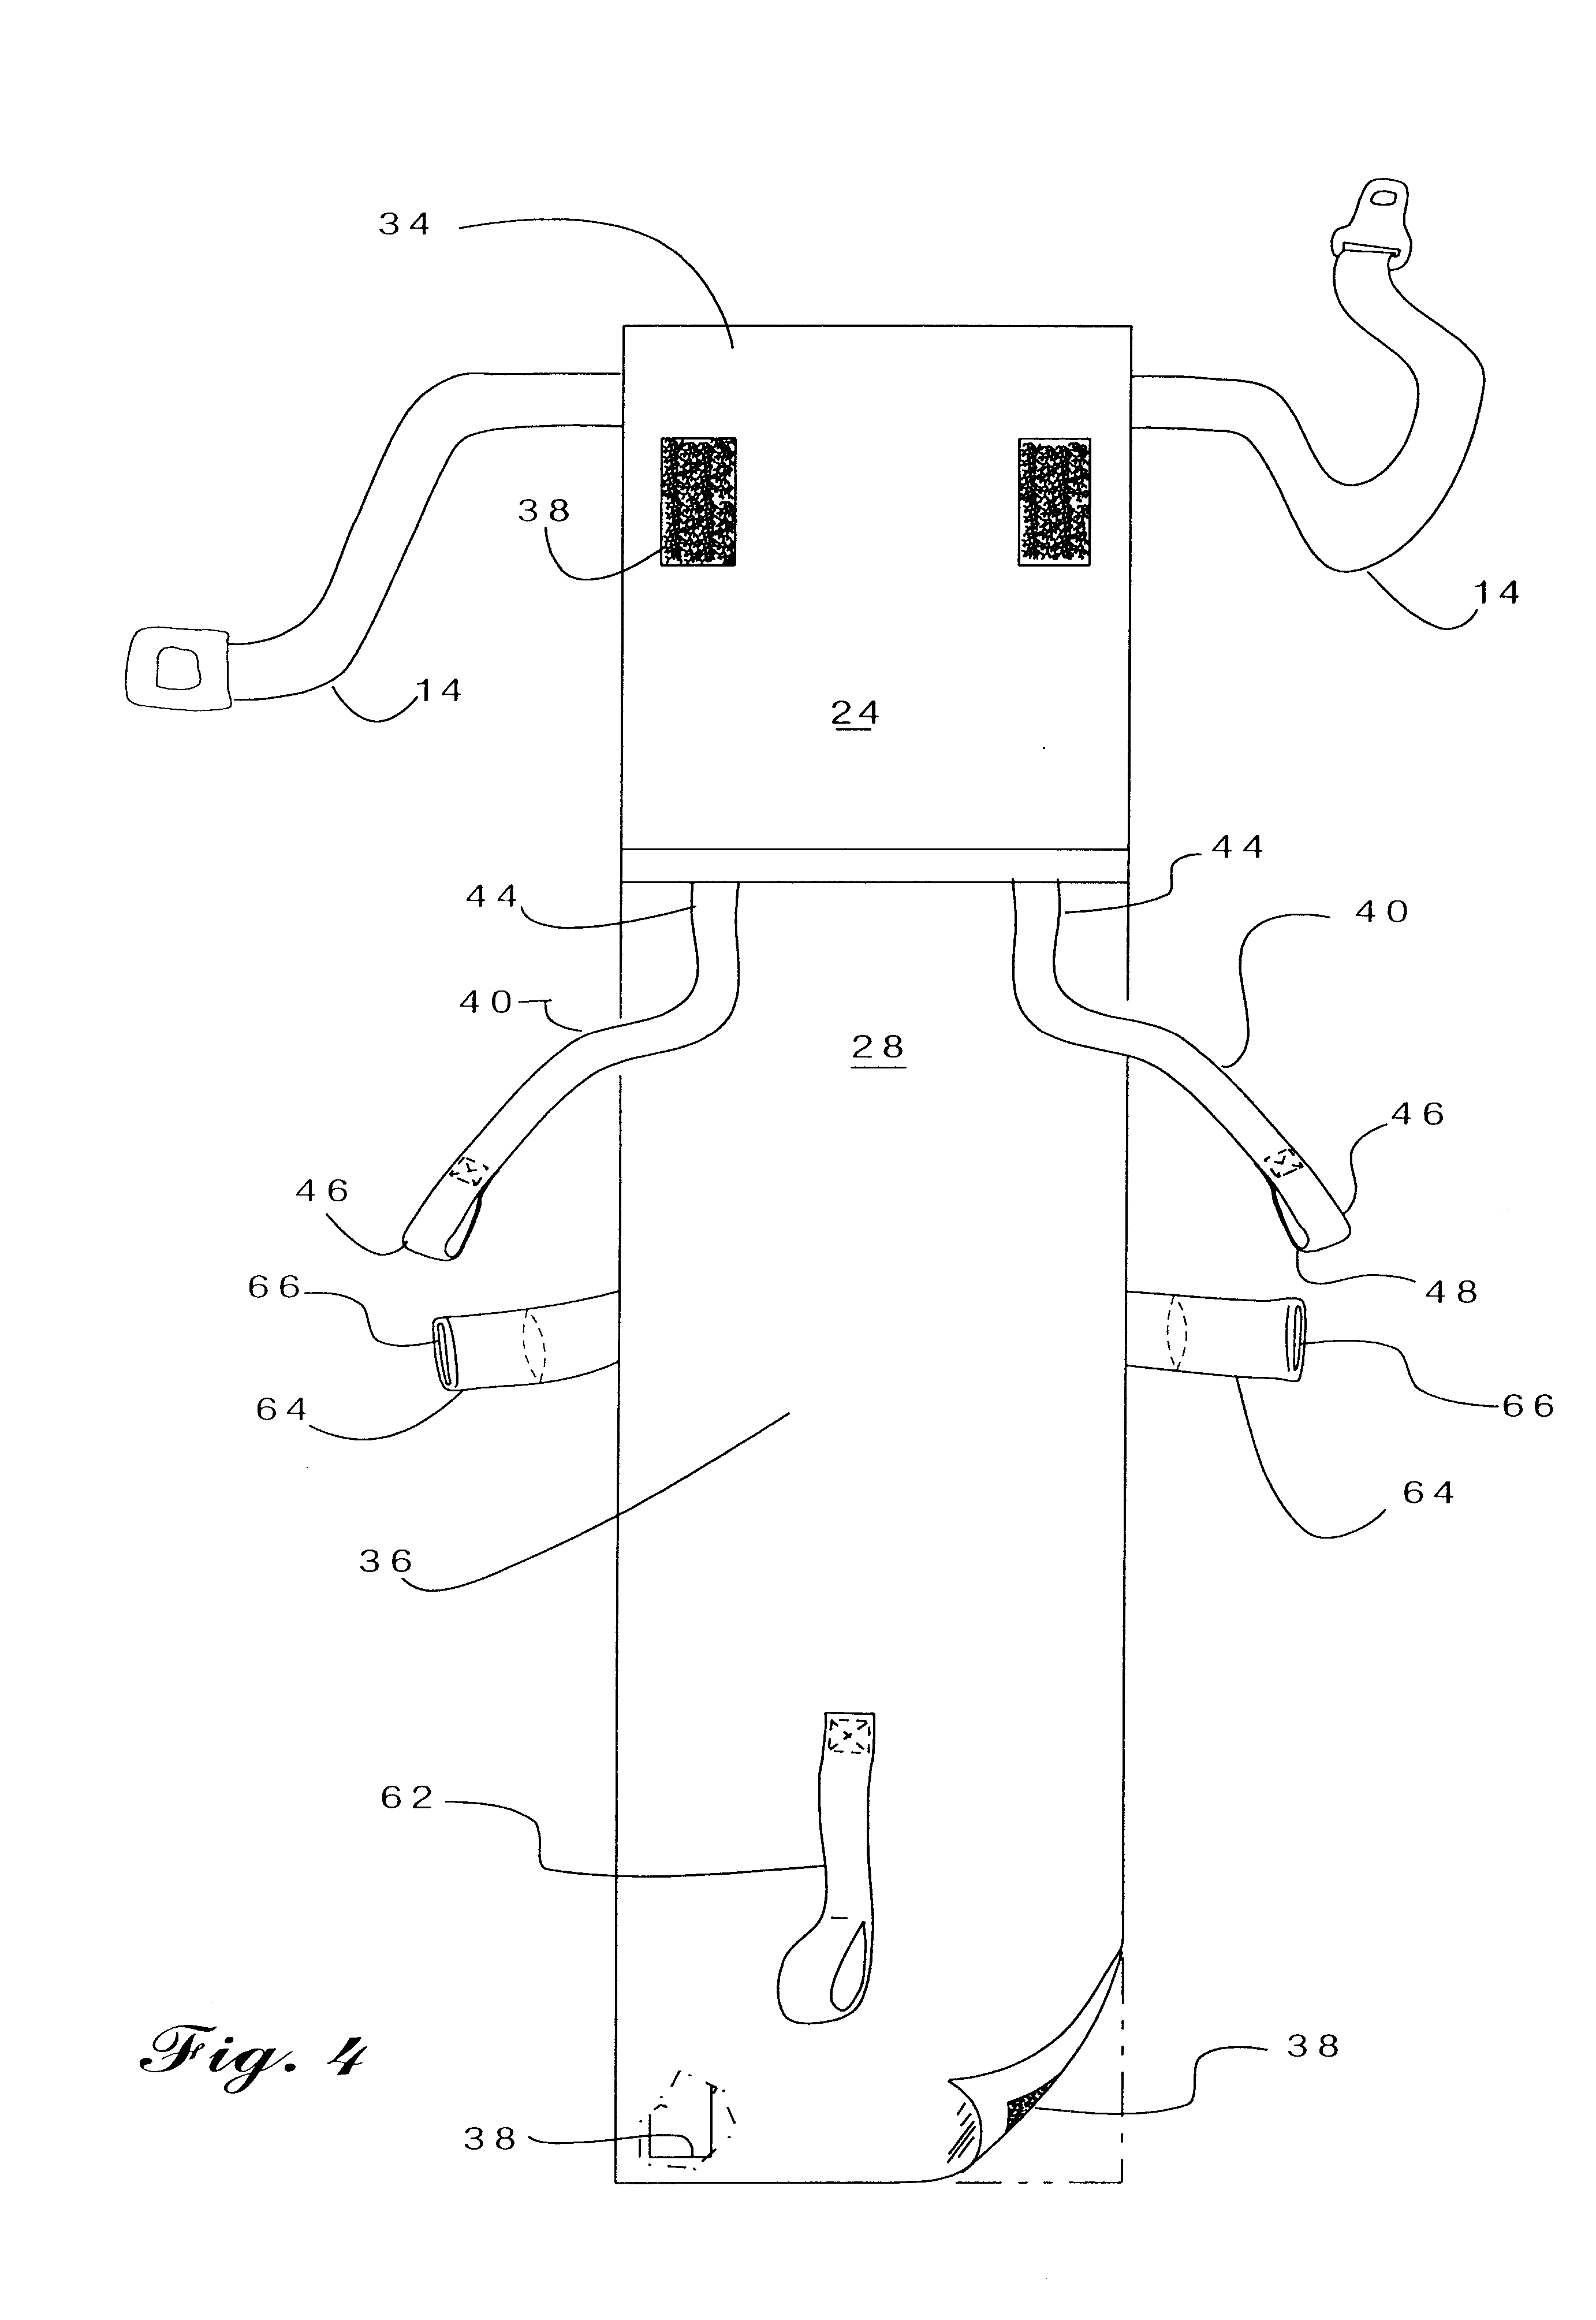 Seatbelt routing and restraint system